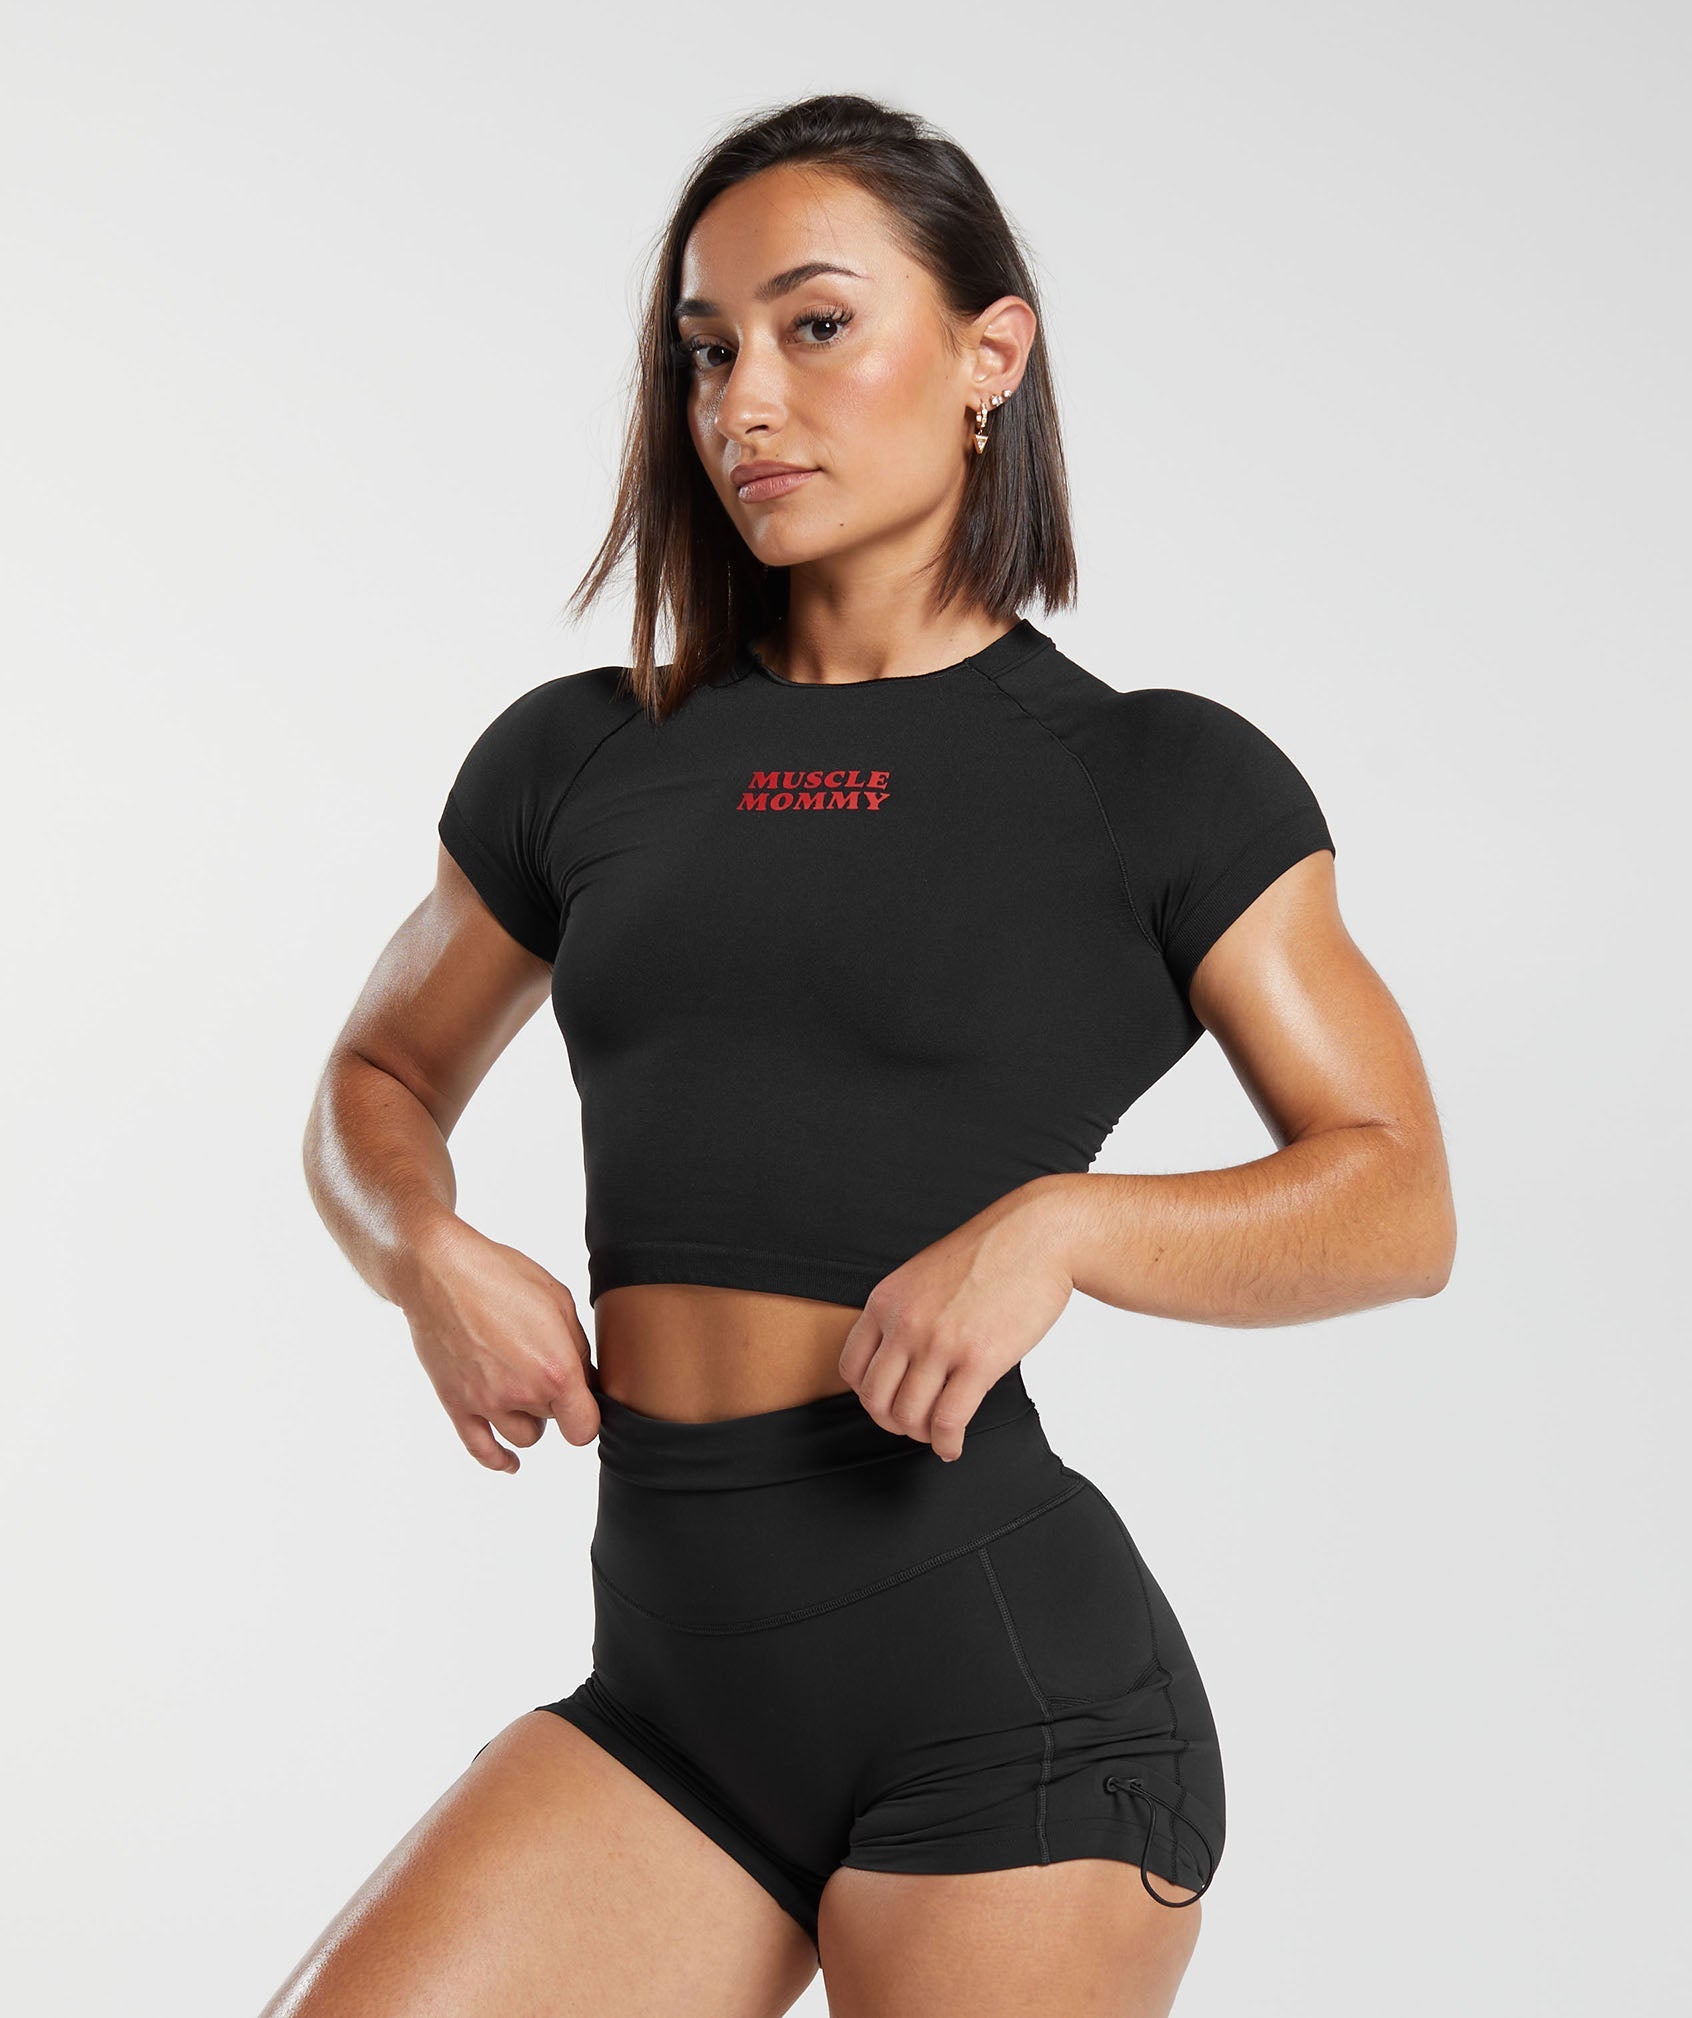 Gymshark Muscle Mommy Graphic Seamless Tee - Black